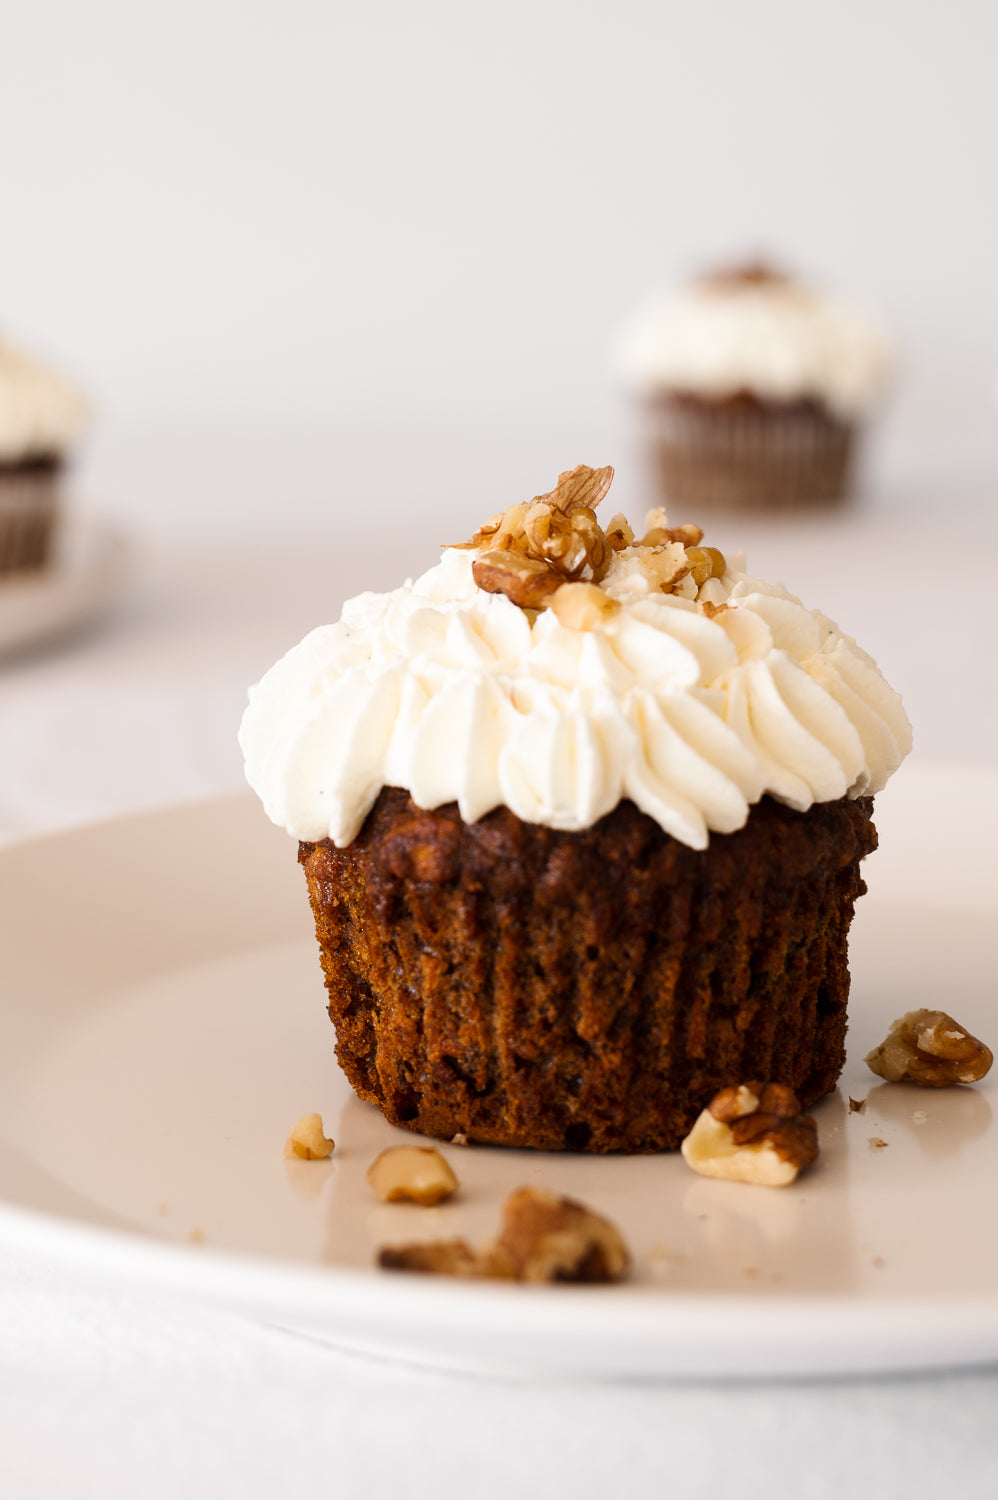 A single vegan carrot cake cup cake on a plate with piped whipped coconut cream on top